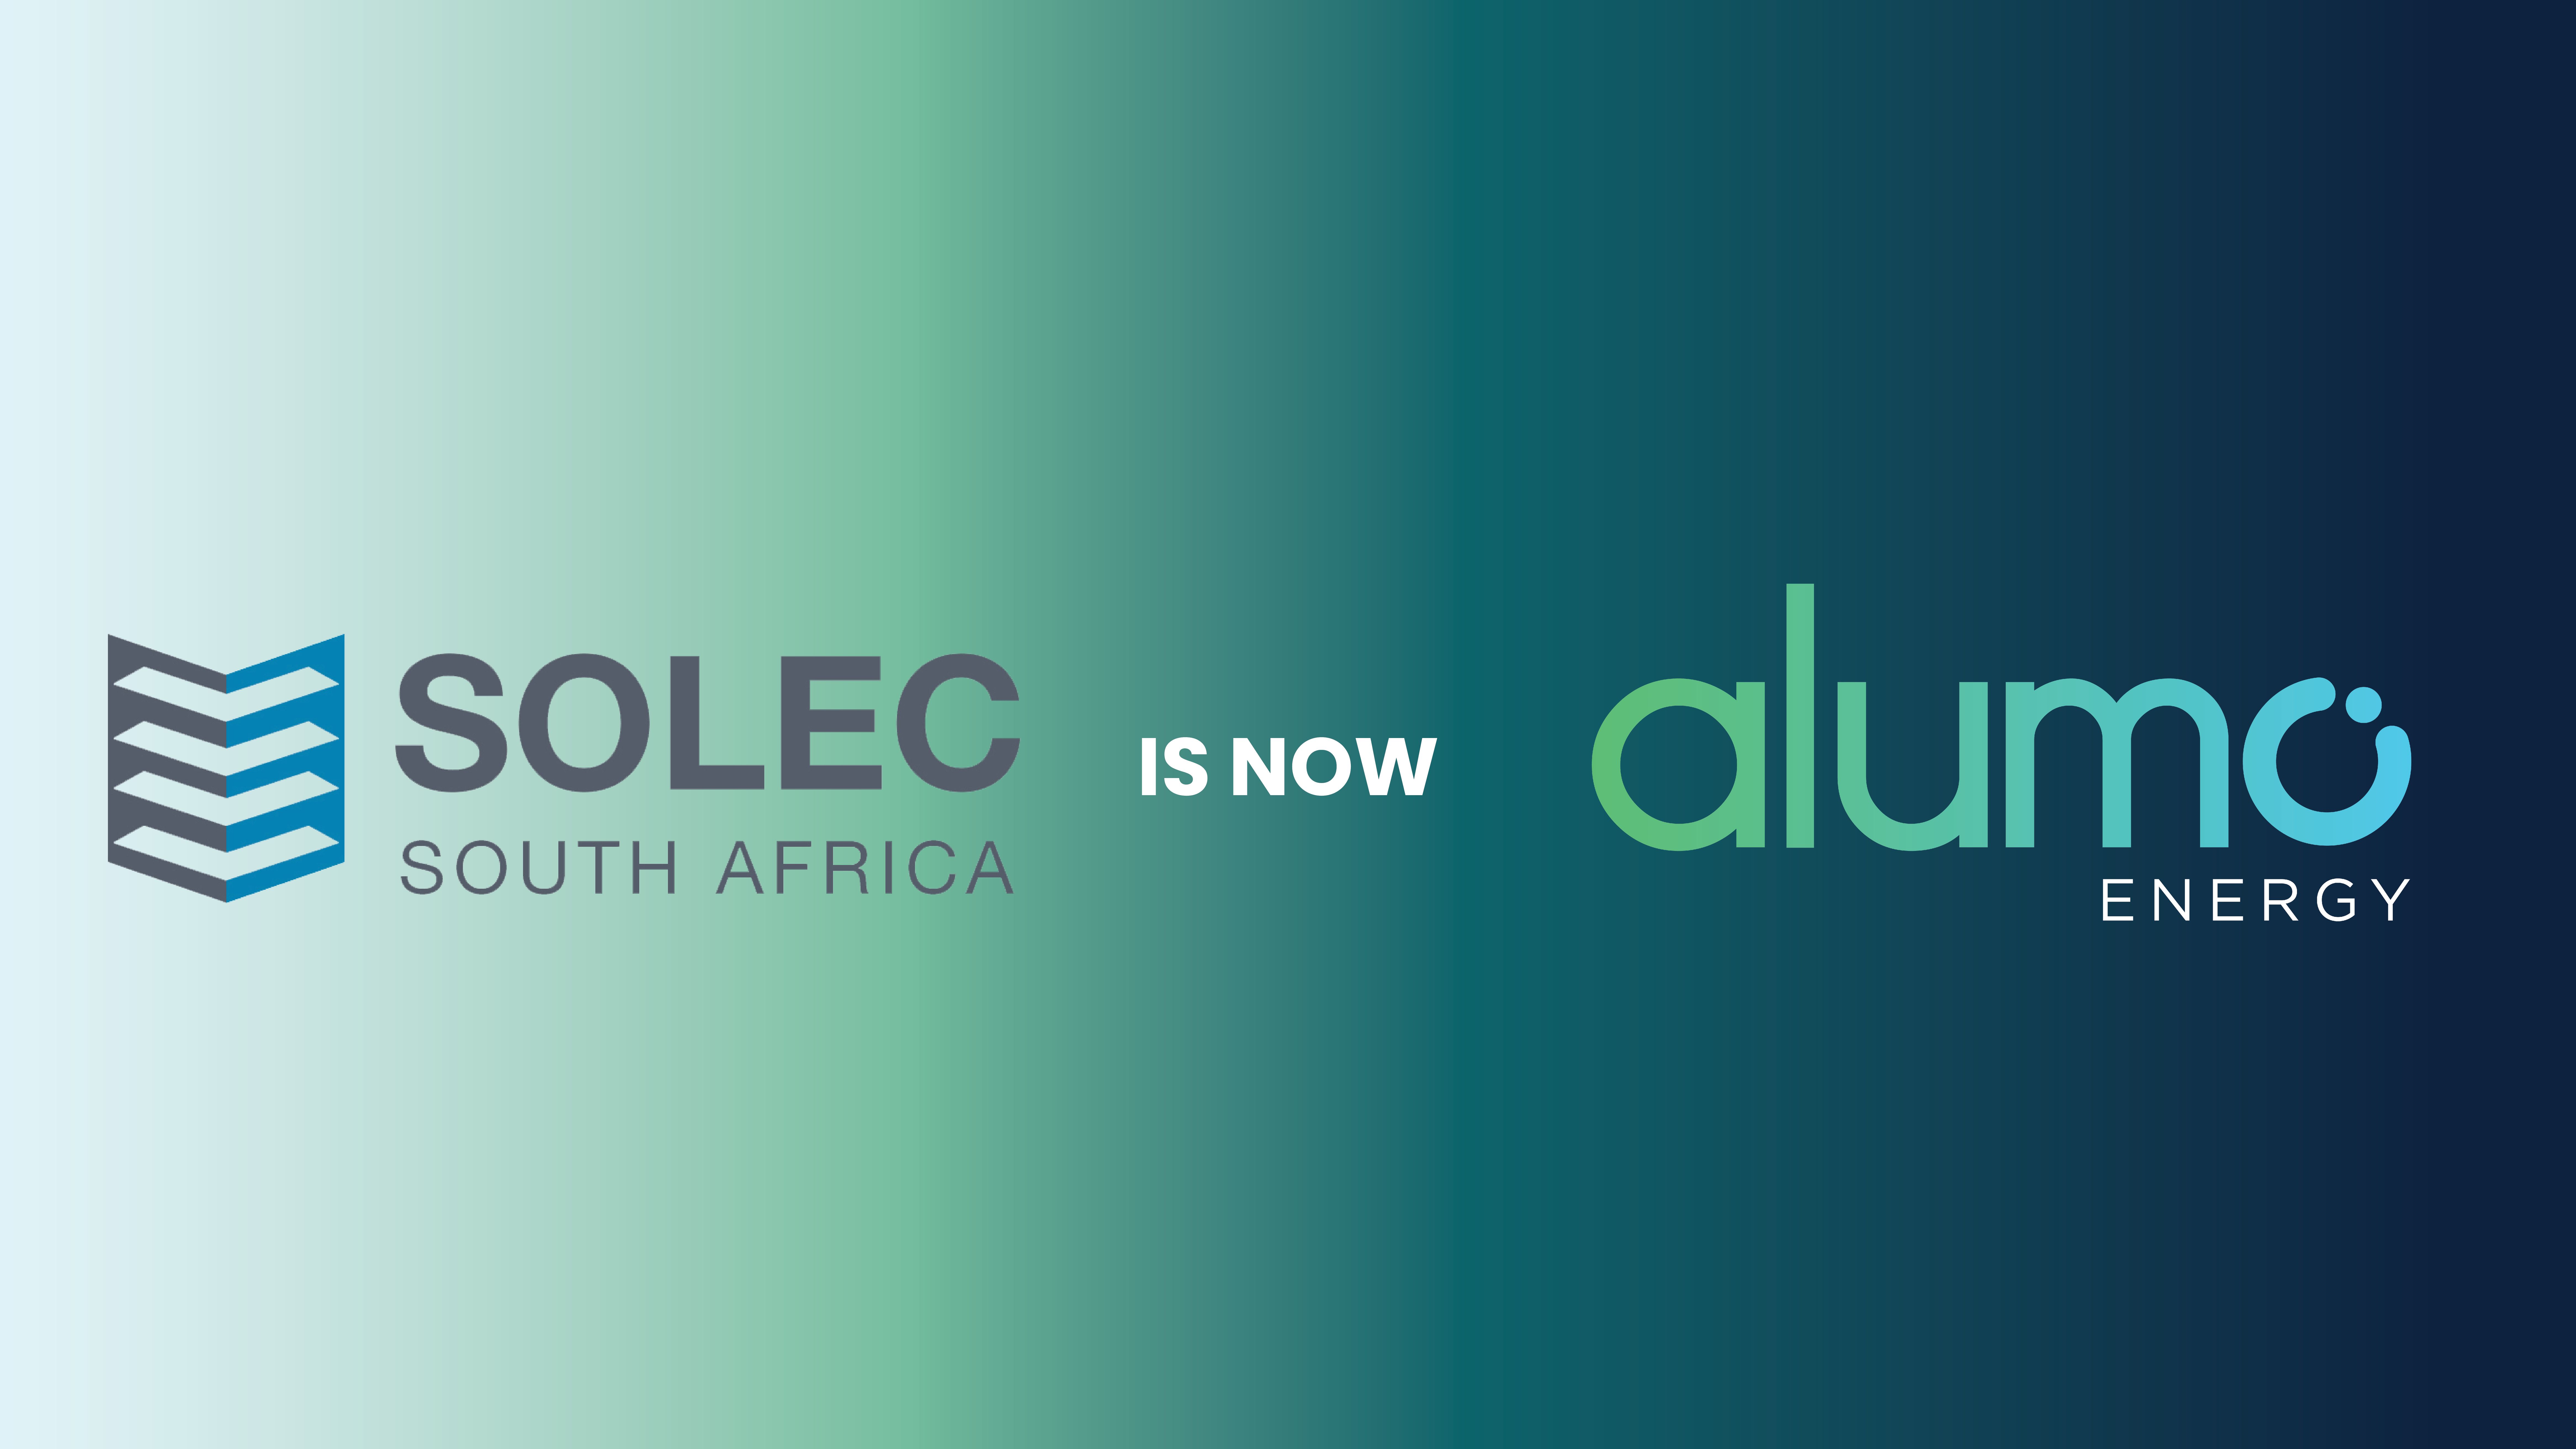 Solec South Africa becomes Alumo Energy